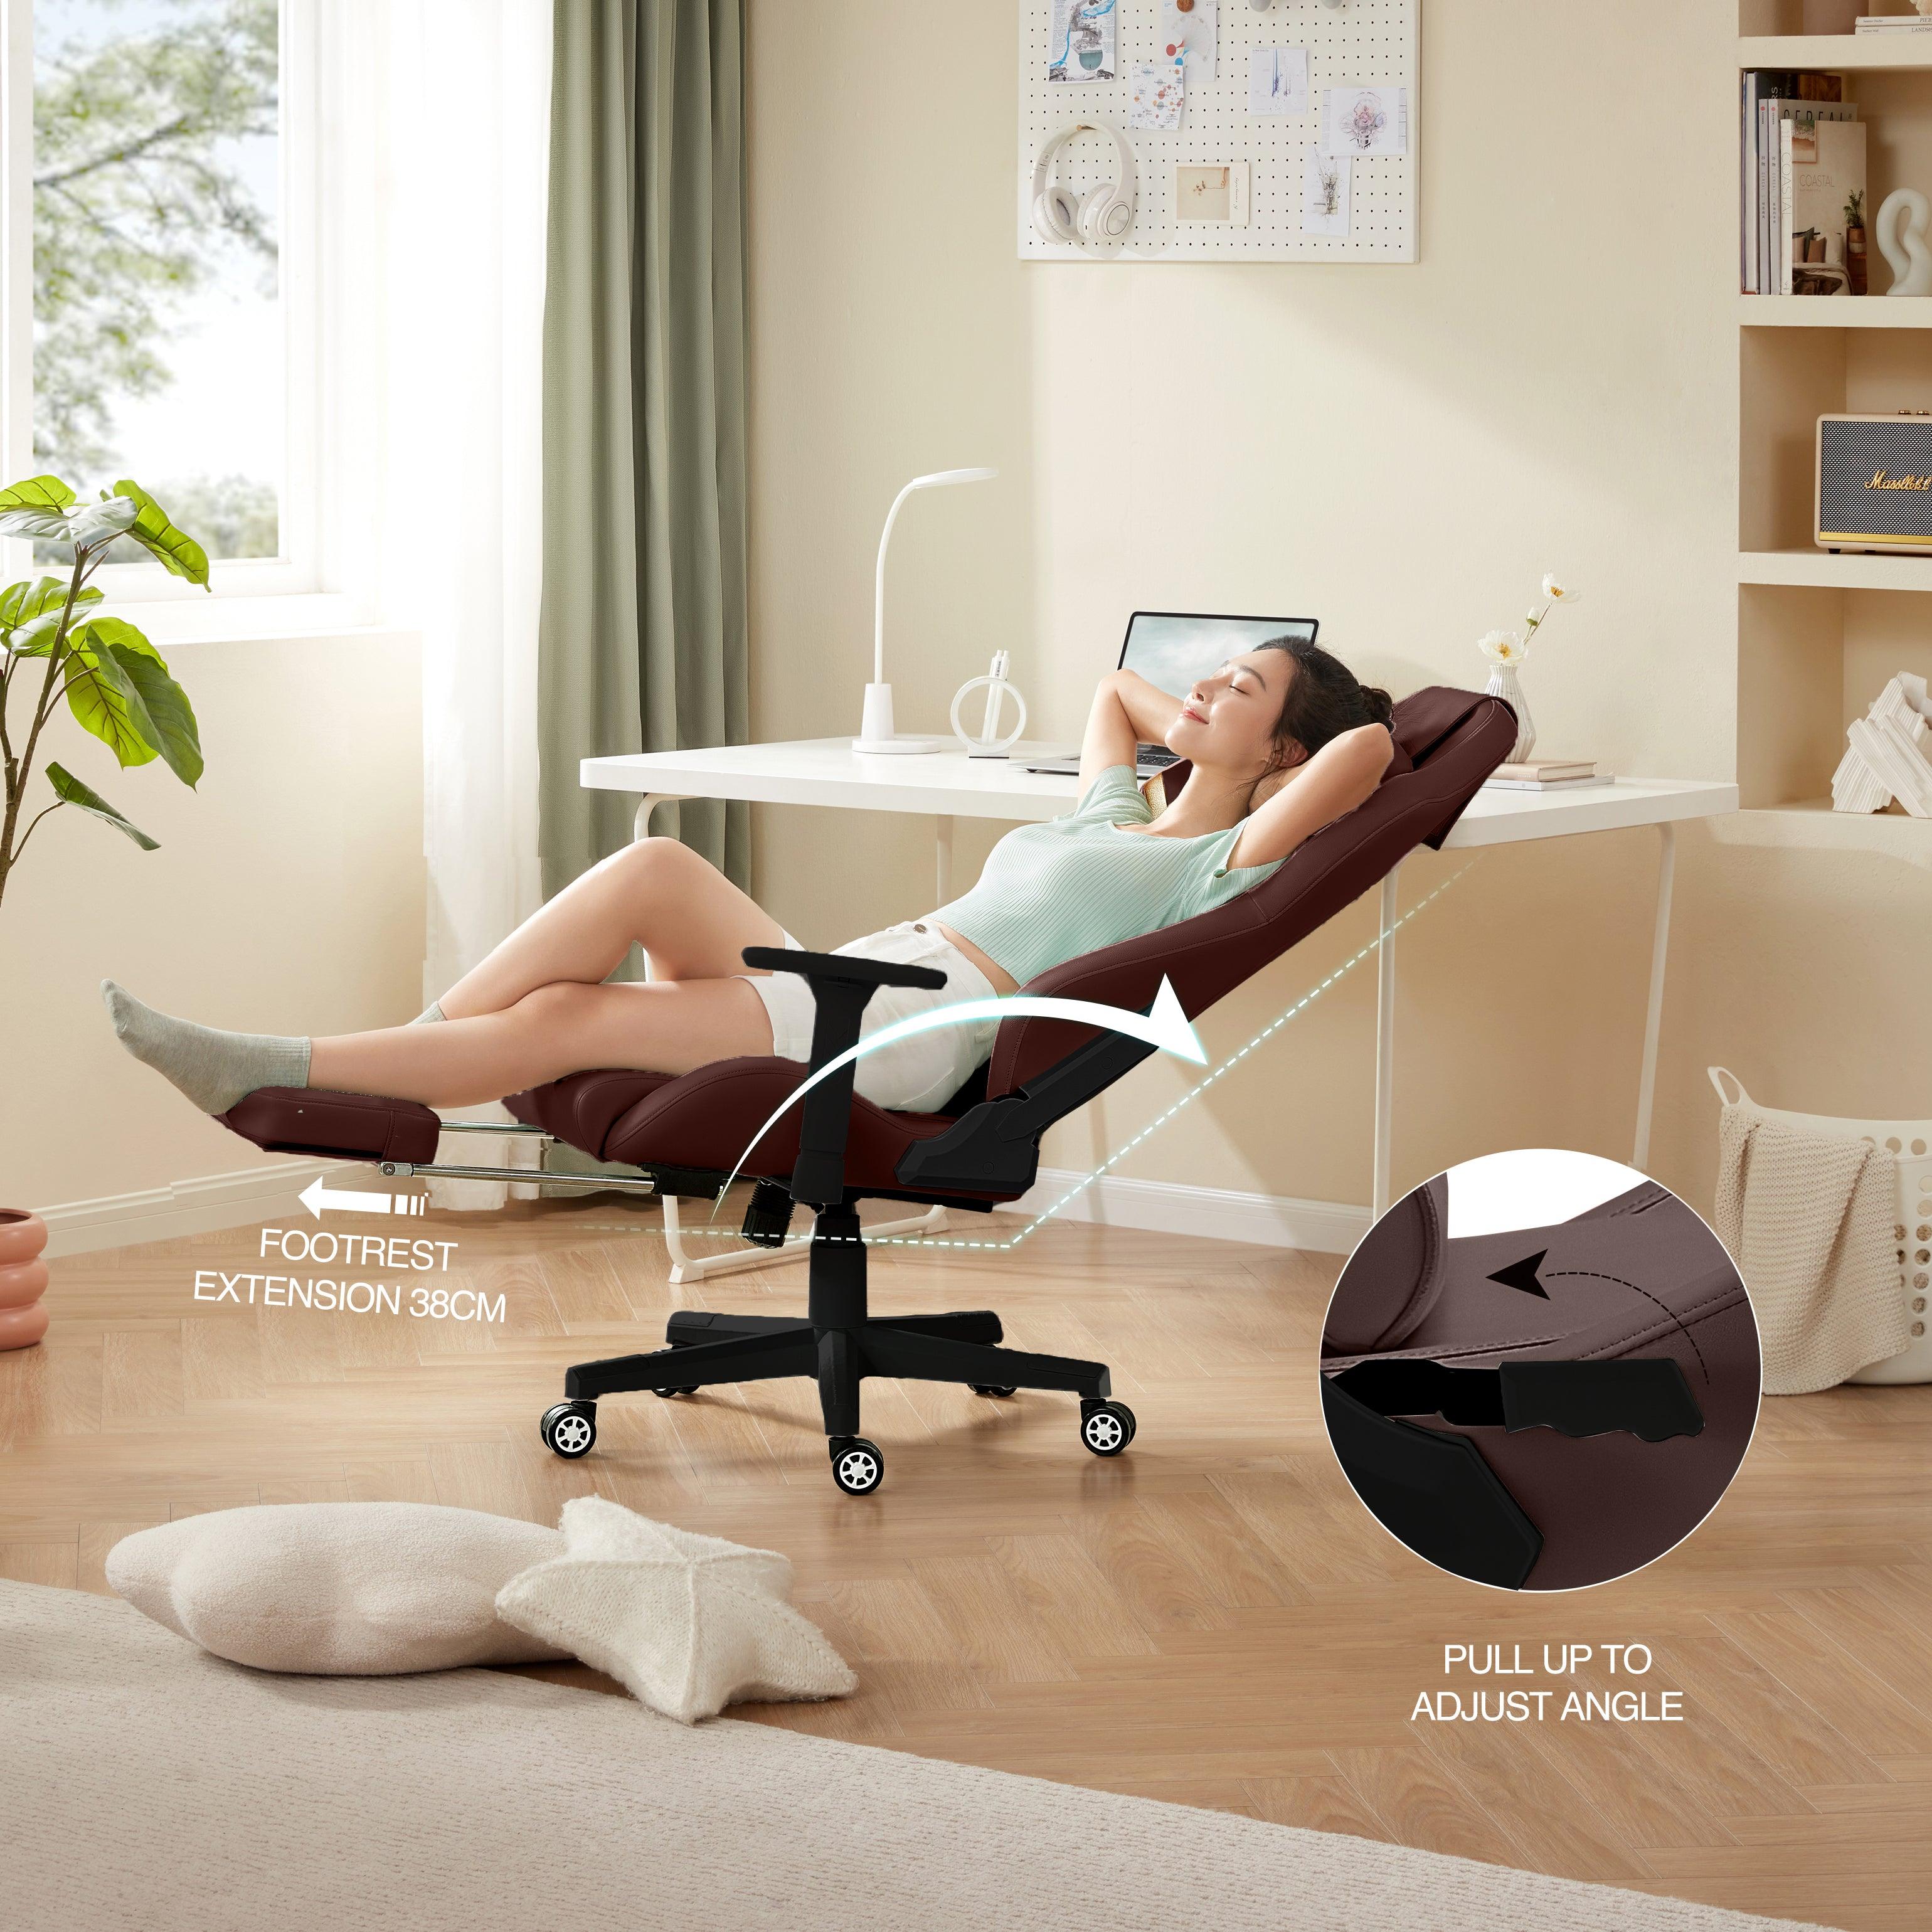 Woman relaxing in a reclining brown office massage chair with footrest extension in a home office setting.